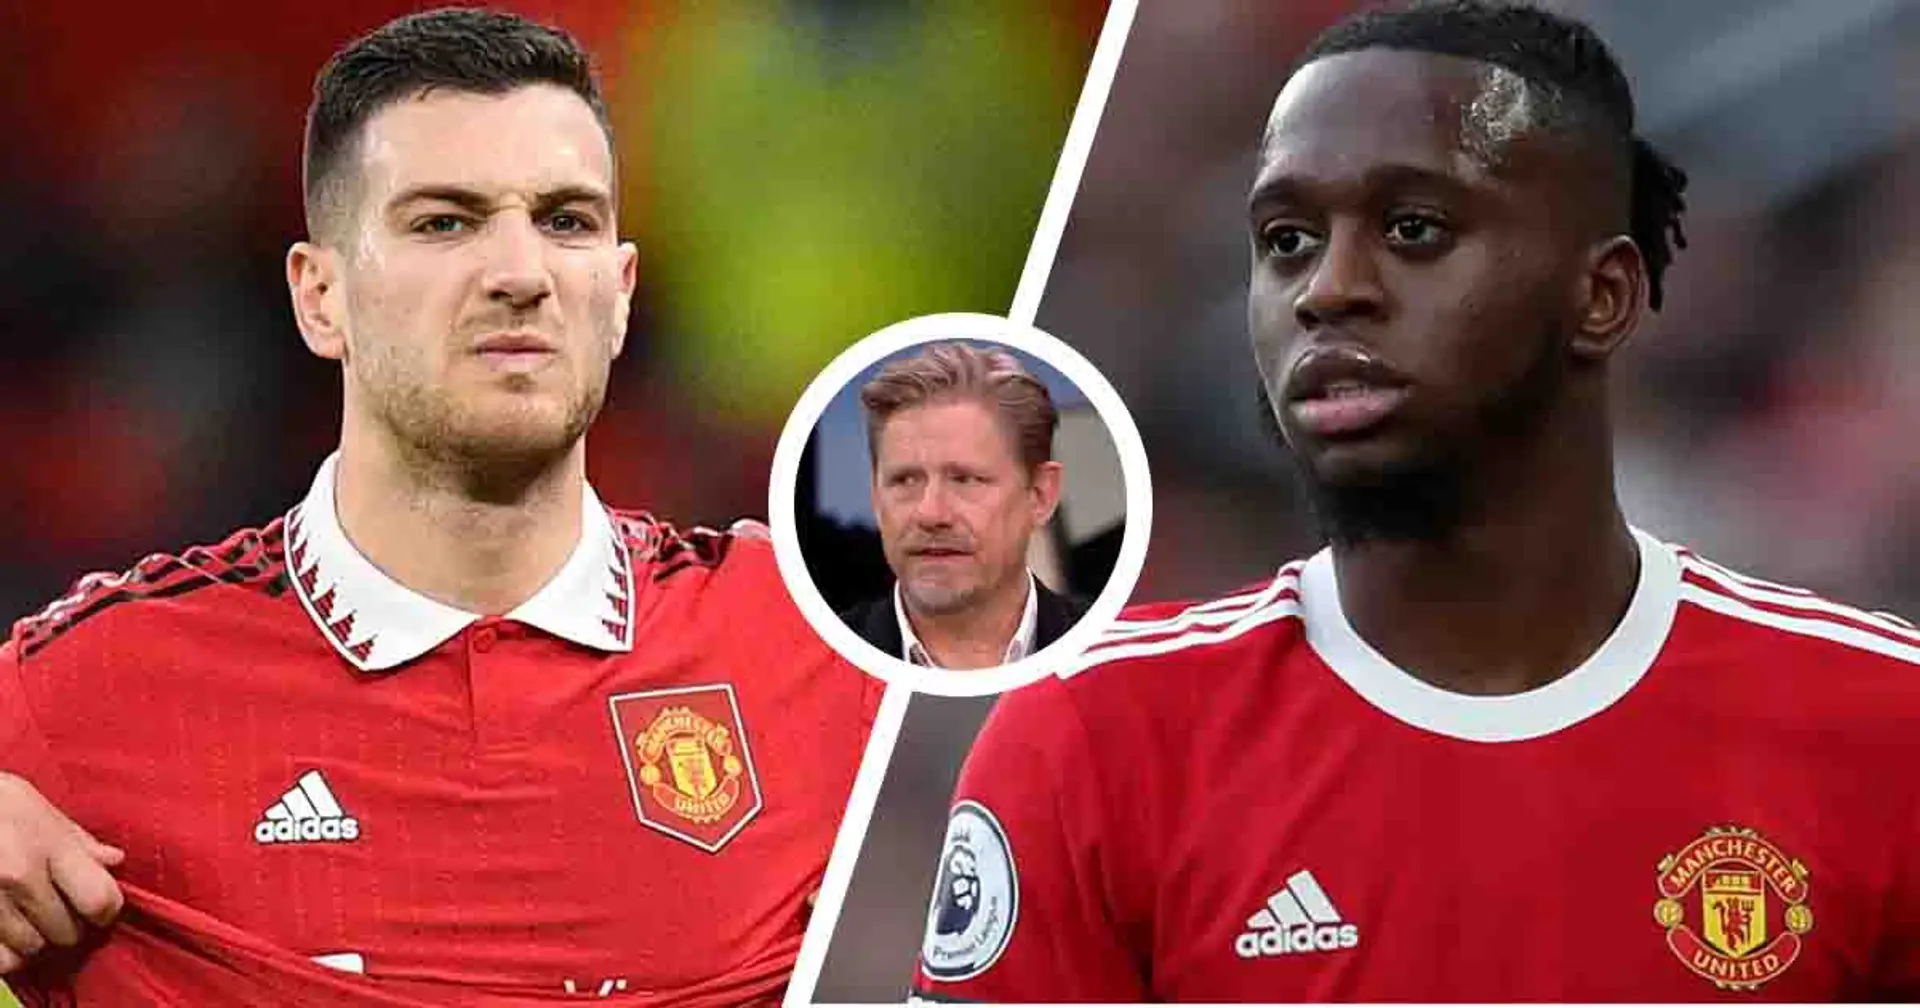 'Their partnership is better': Peter Schmeichel names one reason why Wan-Bissaka should start alongside Antony over Dalot